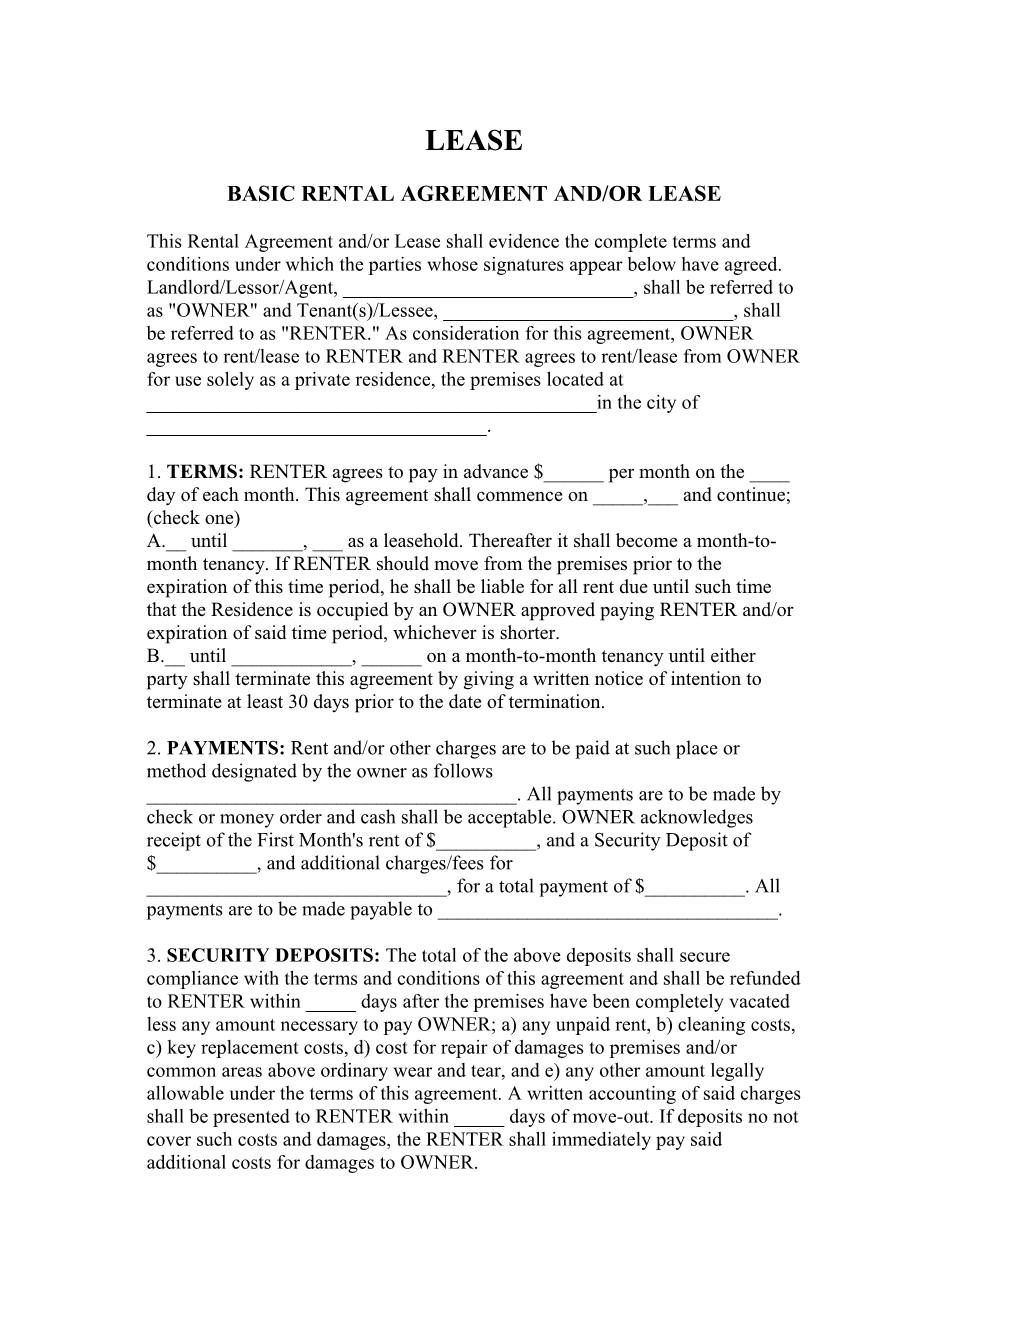 LEASE BASIC RENTAL AGREEMENT AND/OR LEASE This Rental Agreement And/Or Lease Shall Evidence